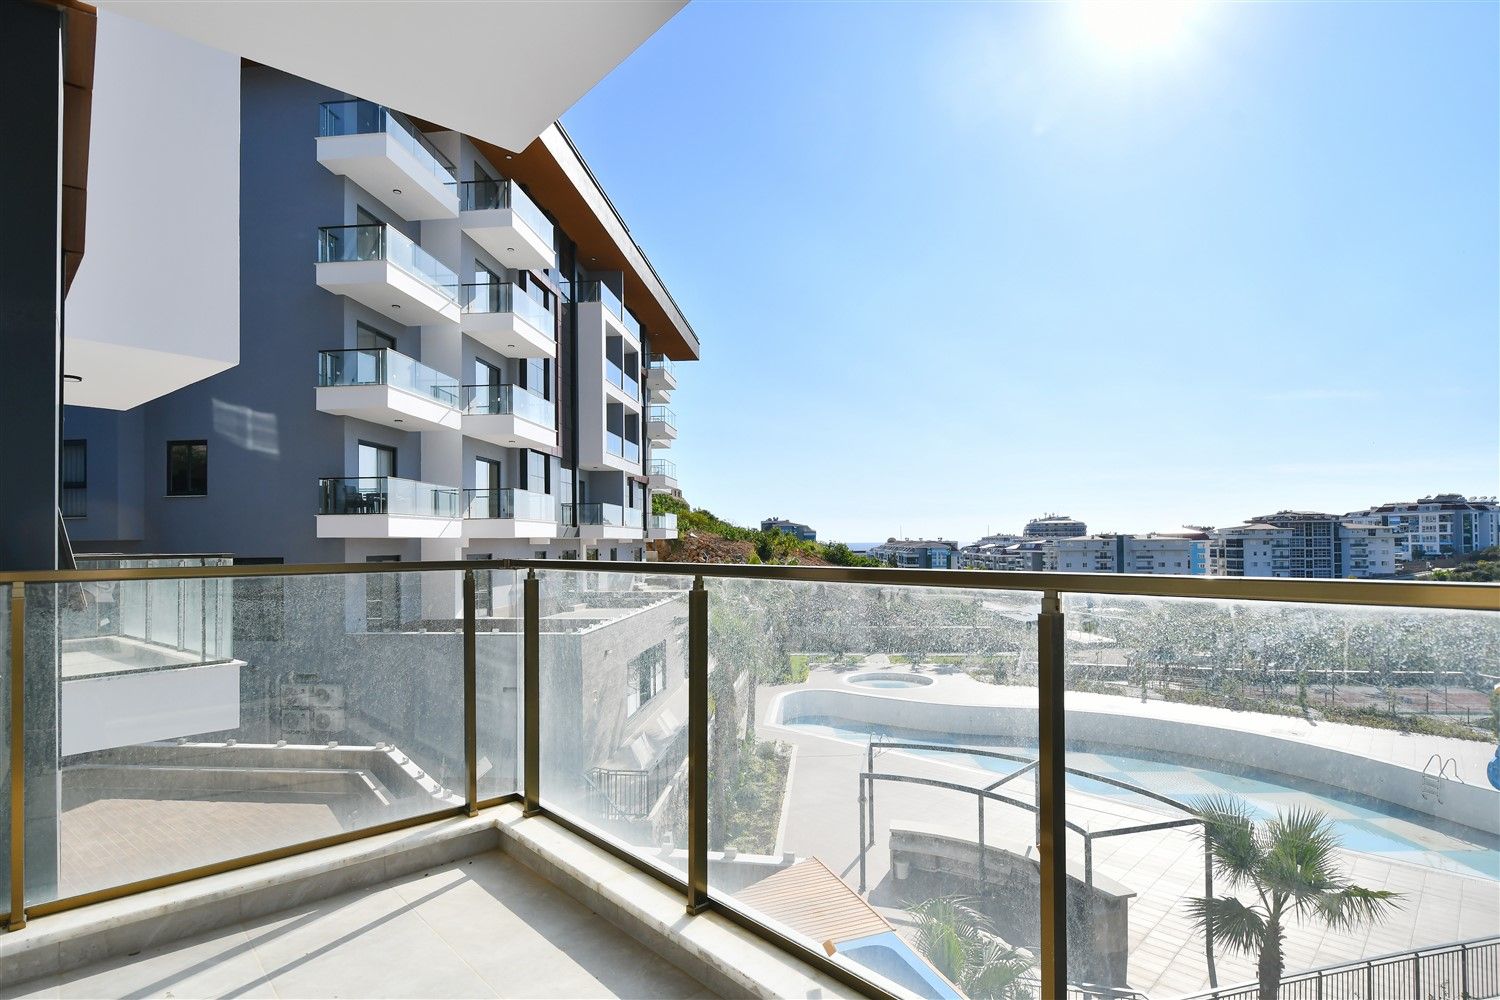 New 1+1 and 2+1 apartments in a new building - Kestel district, Alanya